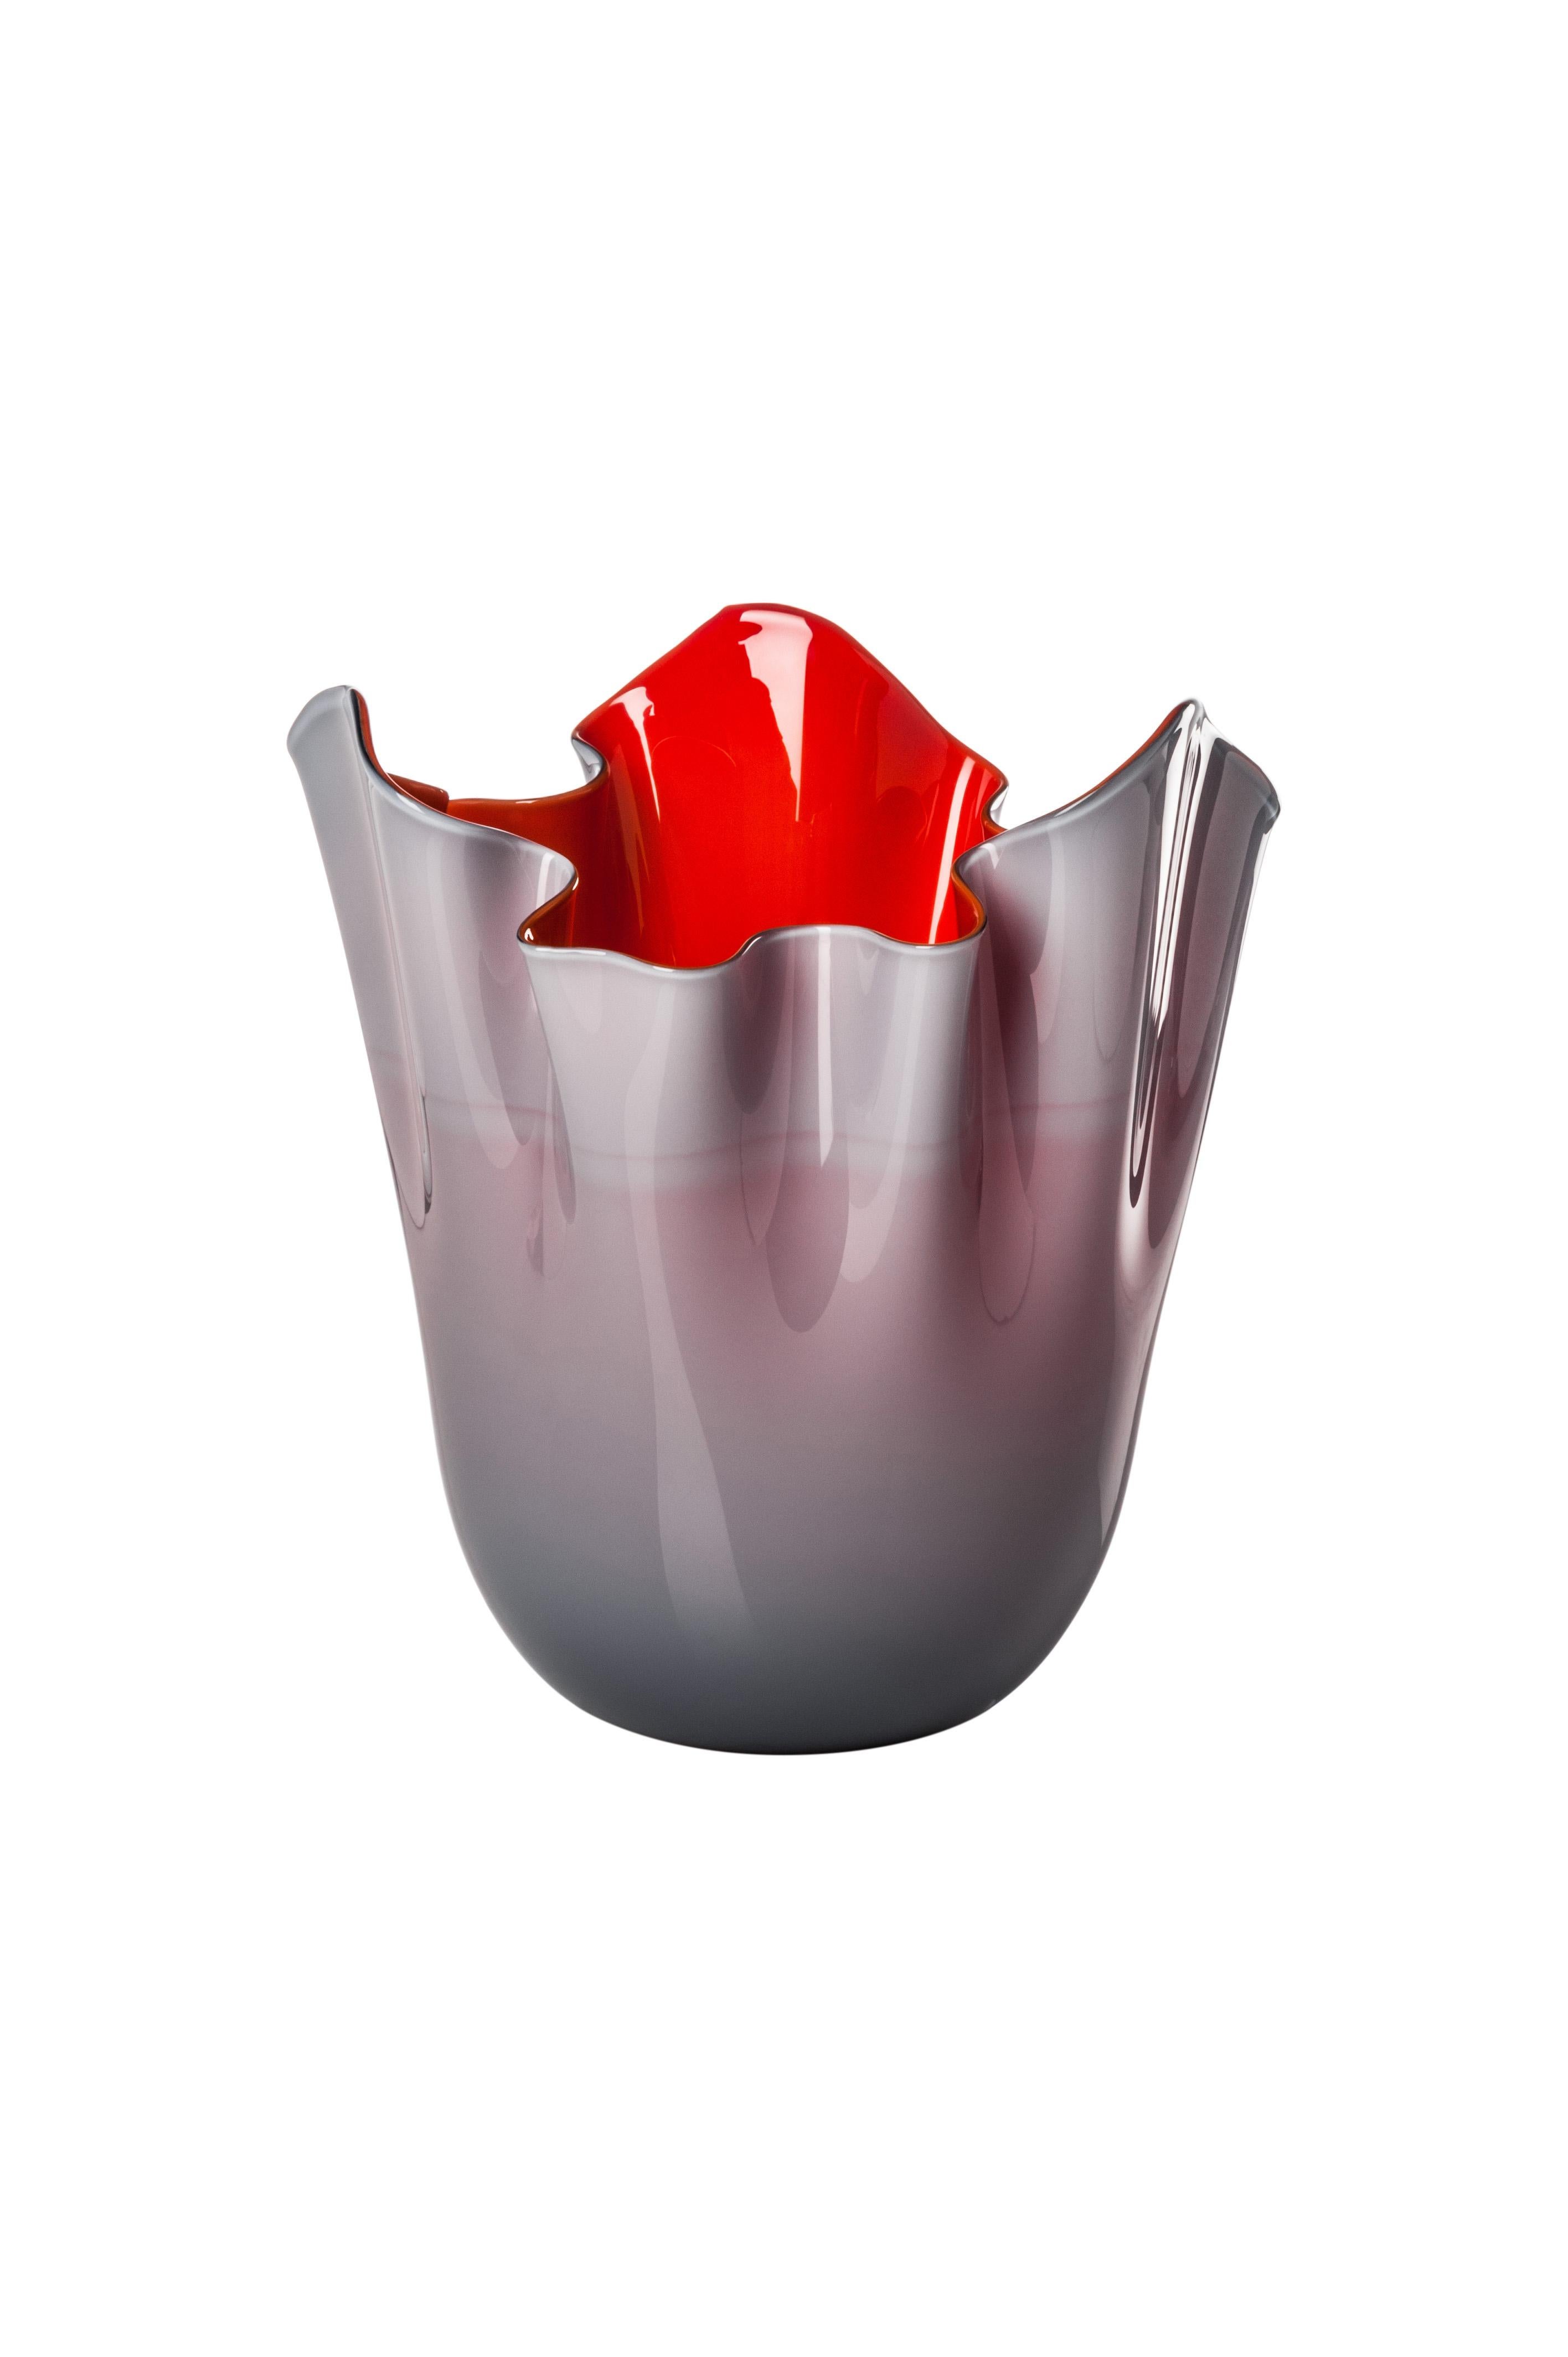 Venini glass vase with pinched rim in grape and red designed by Fulvio Bianconi and Paolo Venini in 1948. Perfect for indoor home decor as container, vide-poche or statement piece for any room. Also available in other colors on